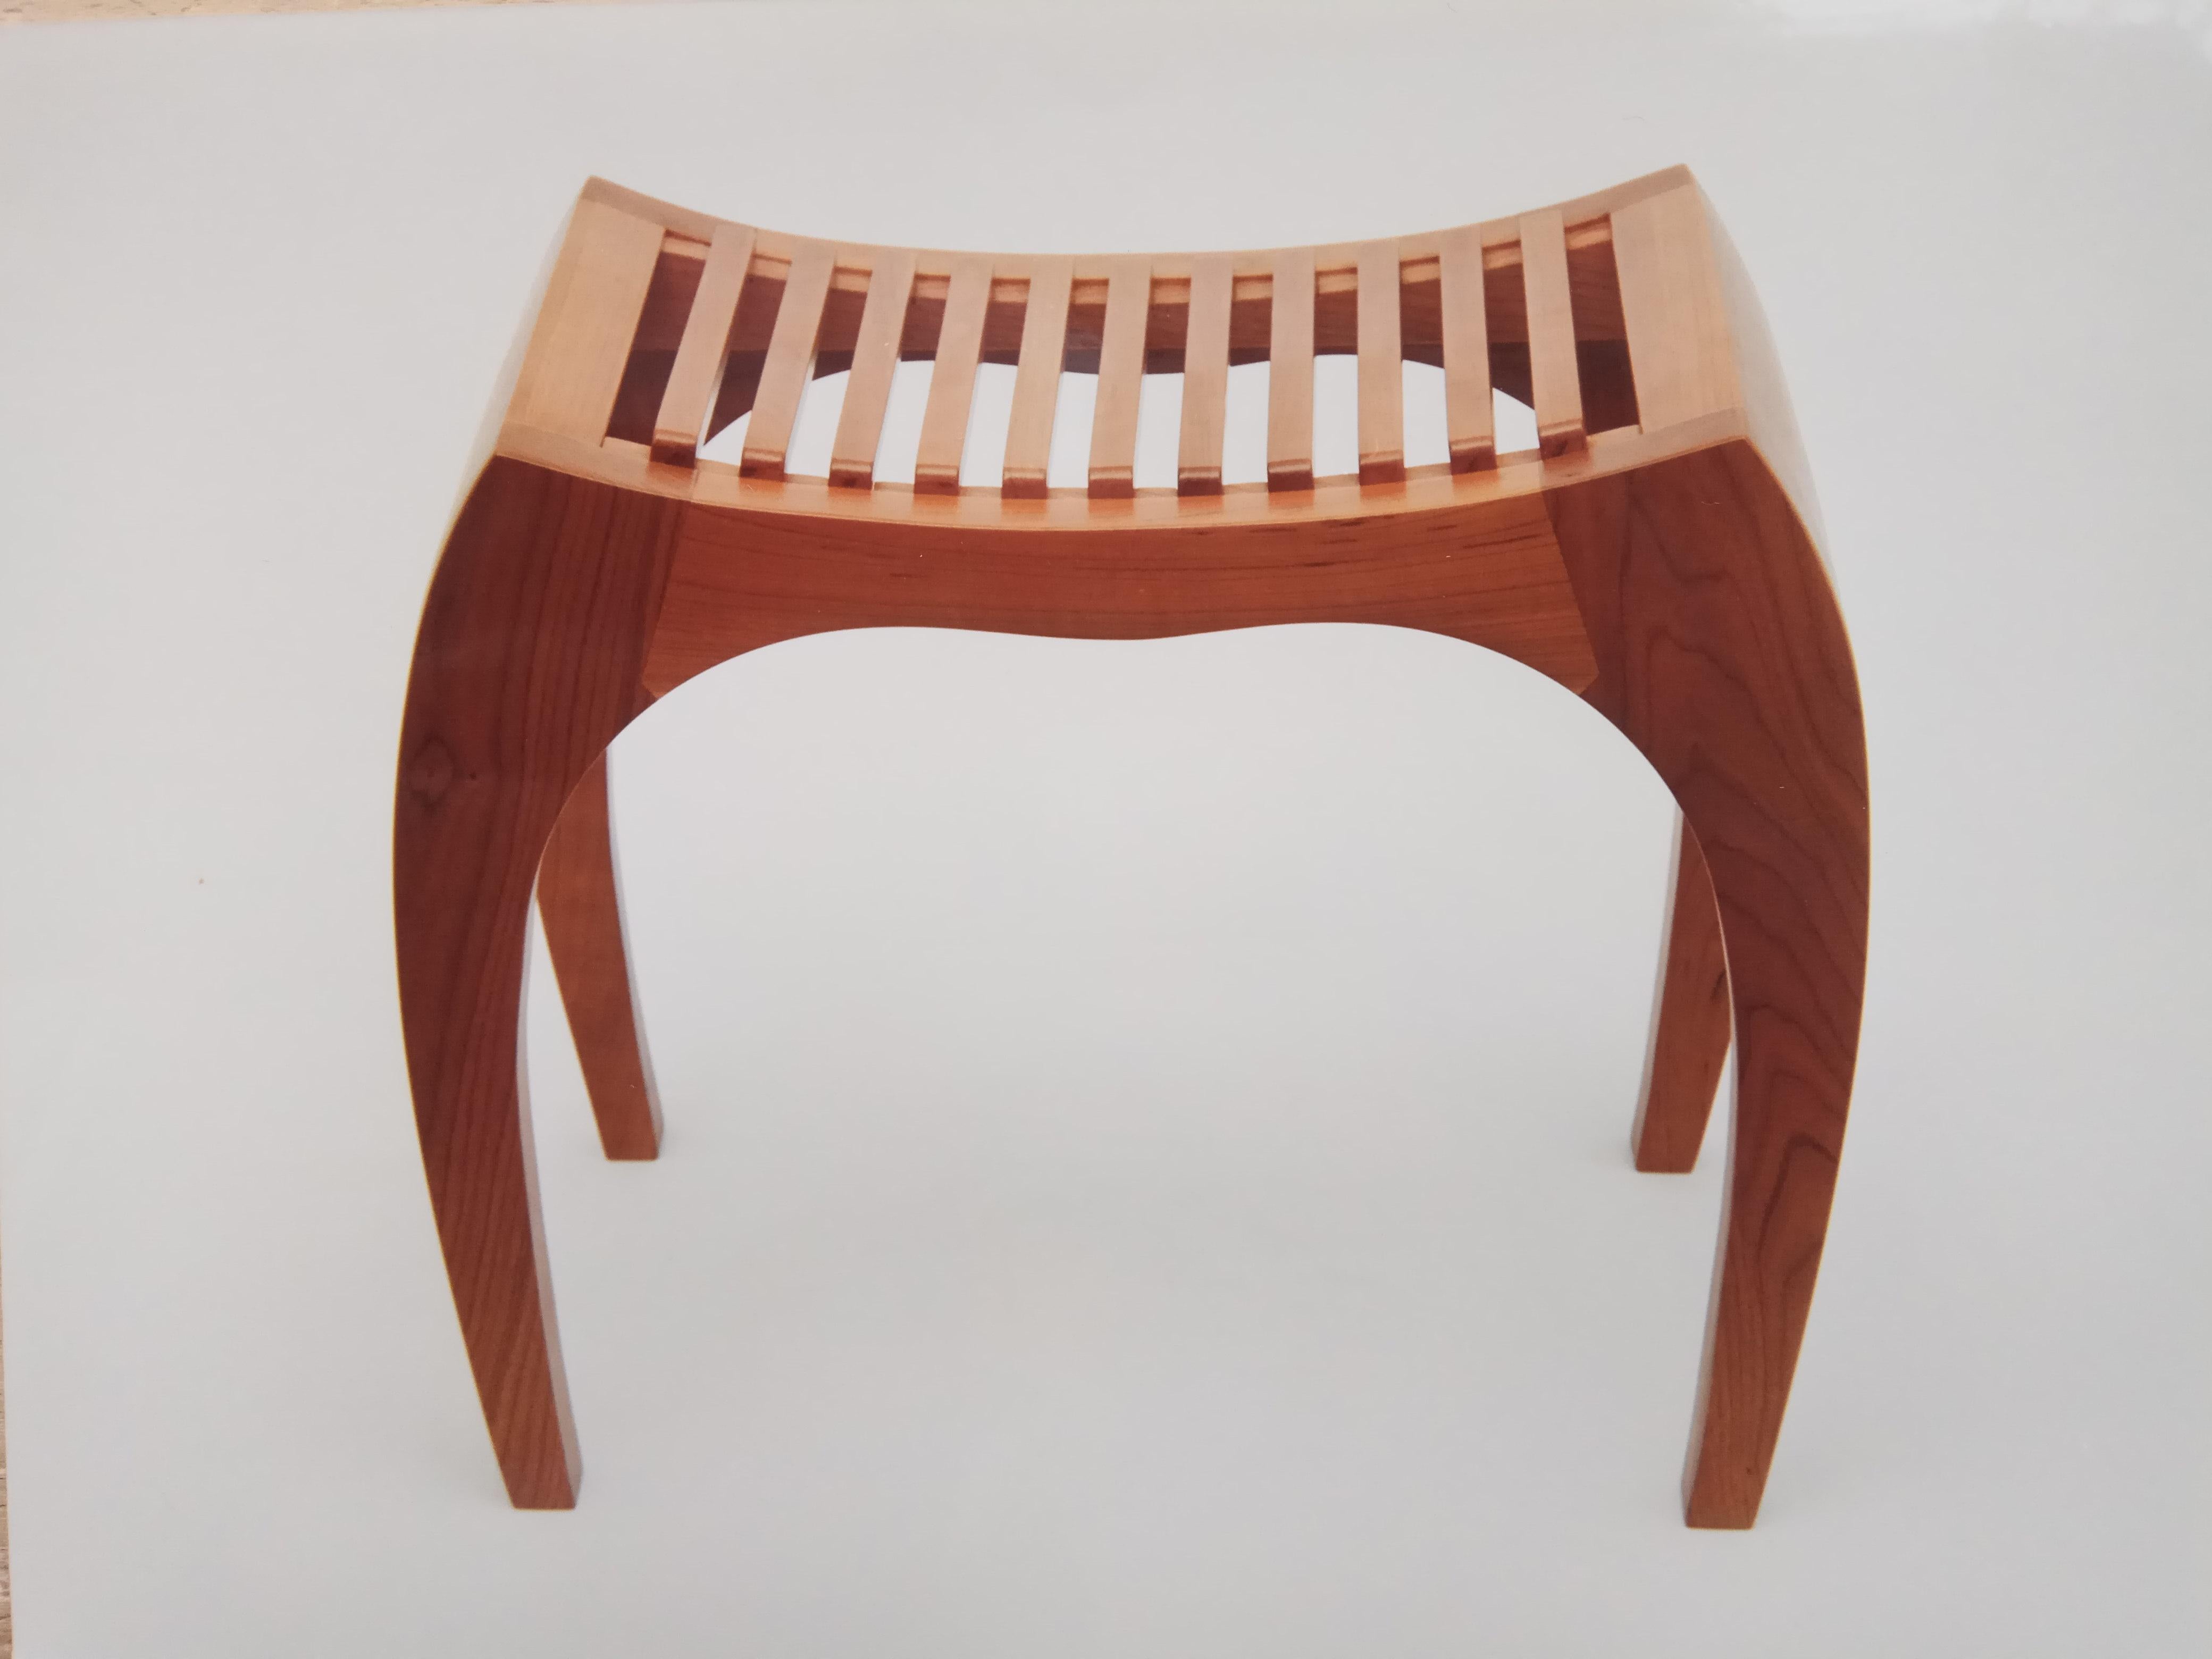 Rumbo stool by Jean-Baptiste Van den Heede
Signed and numbered
Dimensions: L 45 x W 31 x H 40 cm
Materials: Solid cherrywood

Also available in Iroko wood and other woods on demand.
   

The Rumbo stool is a unique, limited series design and each